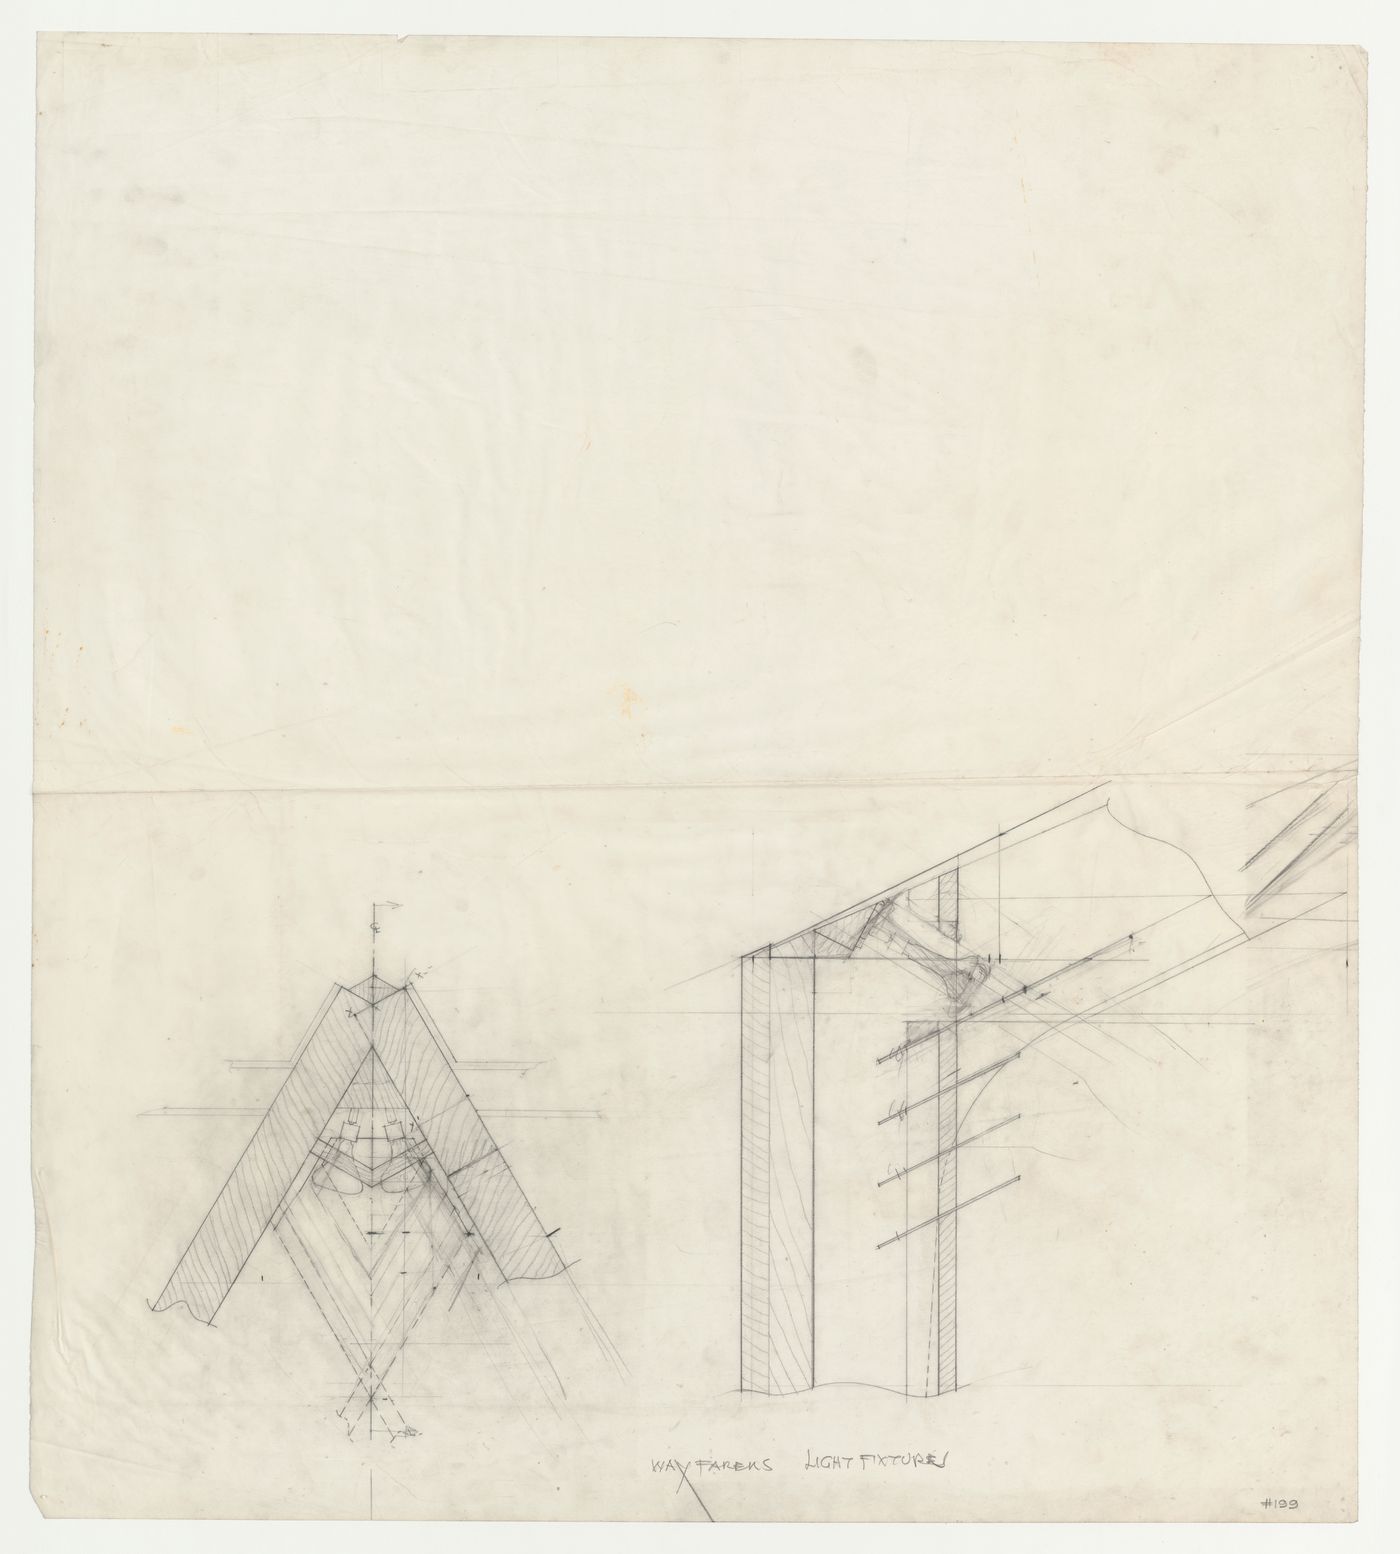 Wayfarers' Chapel, Palos Verdes, California: Cross section and section for interior truss lighting fixtures for the chapel